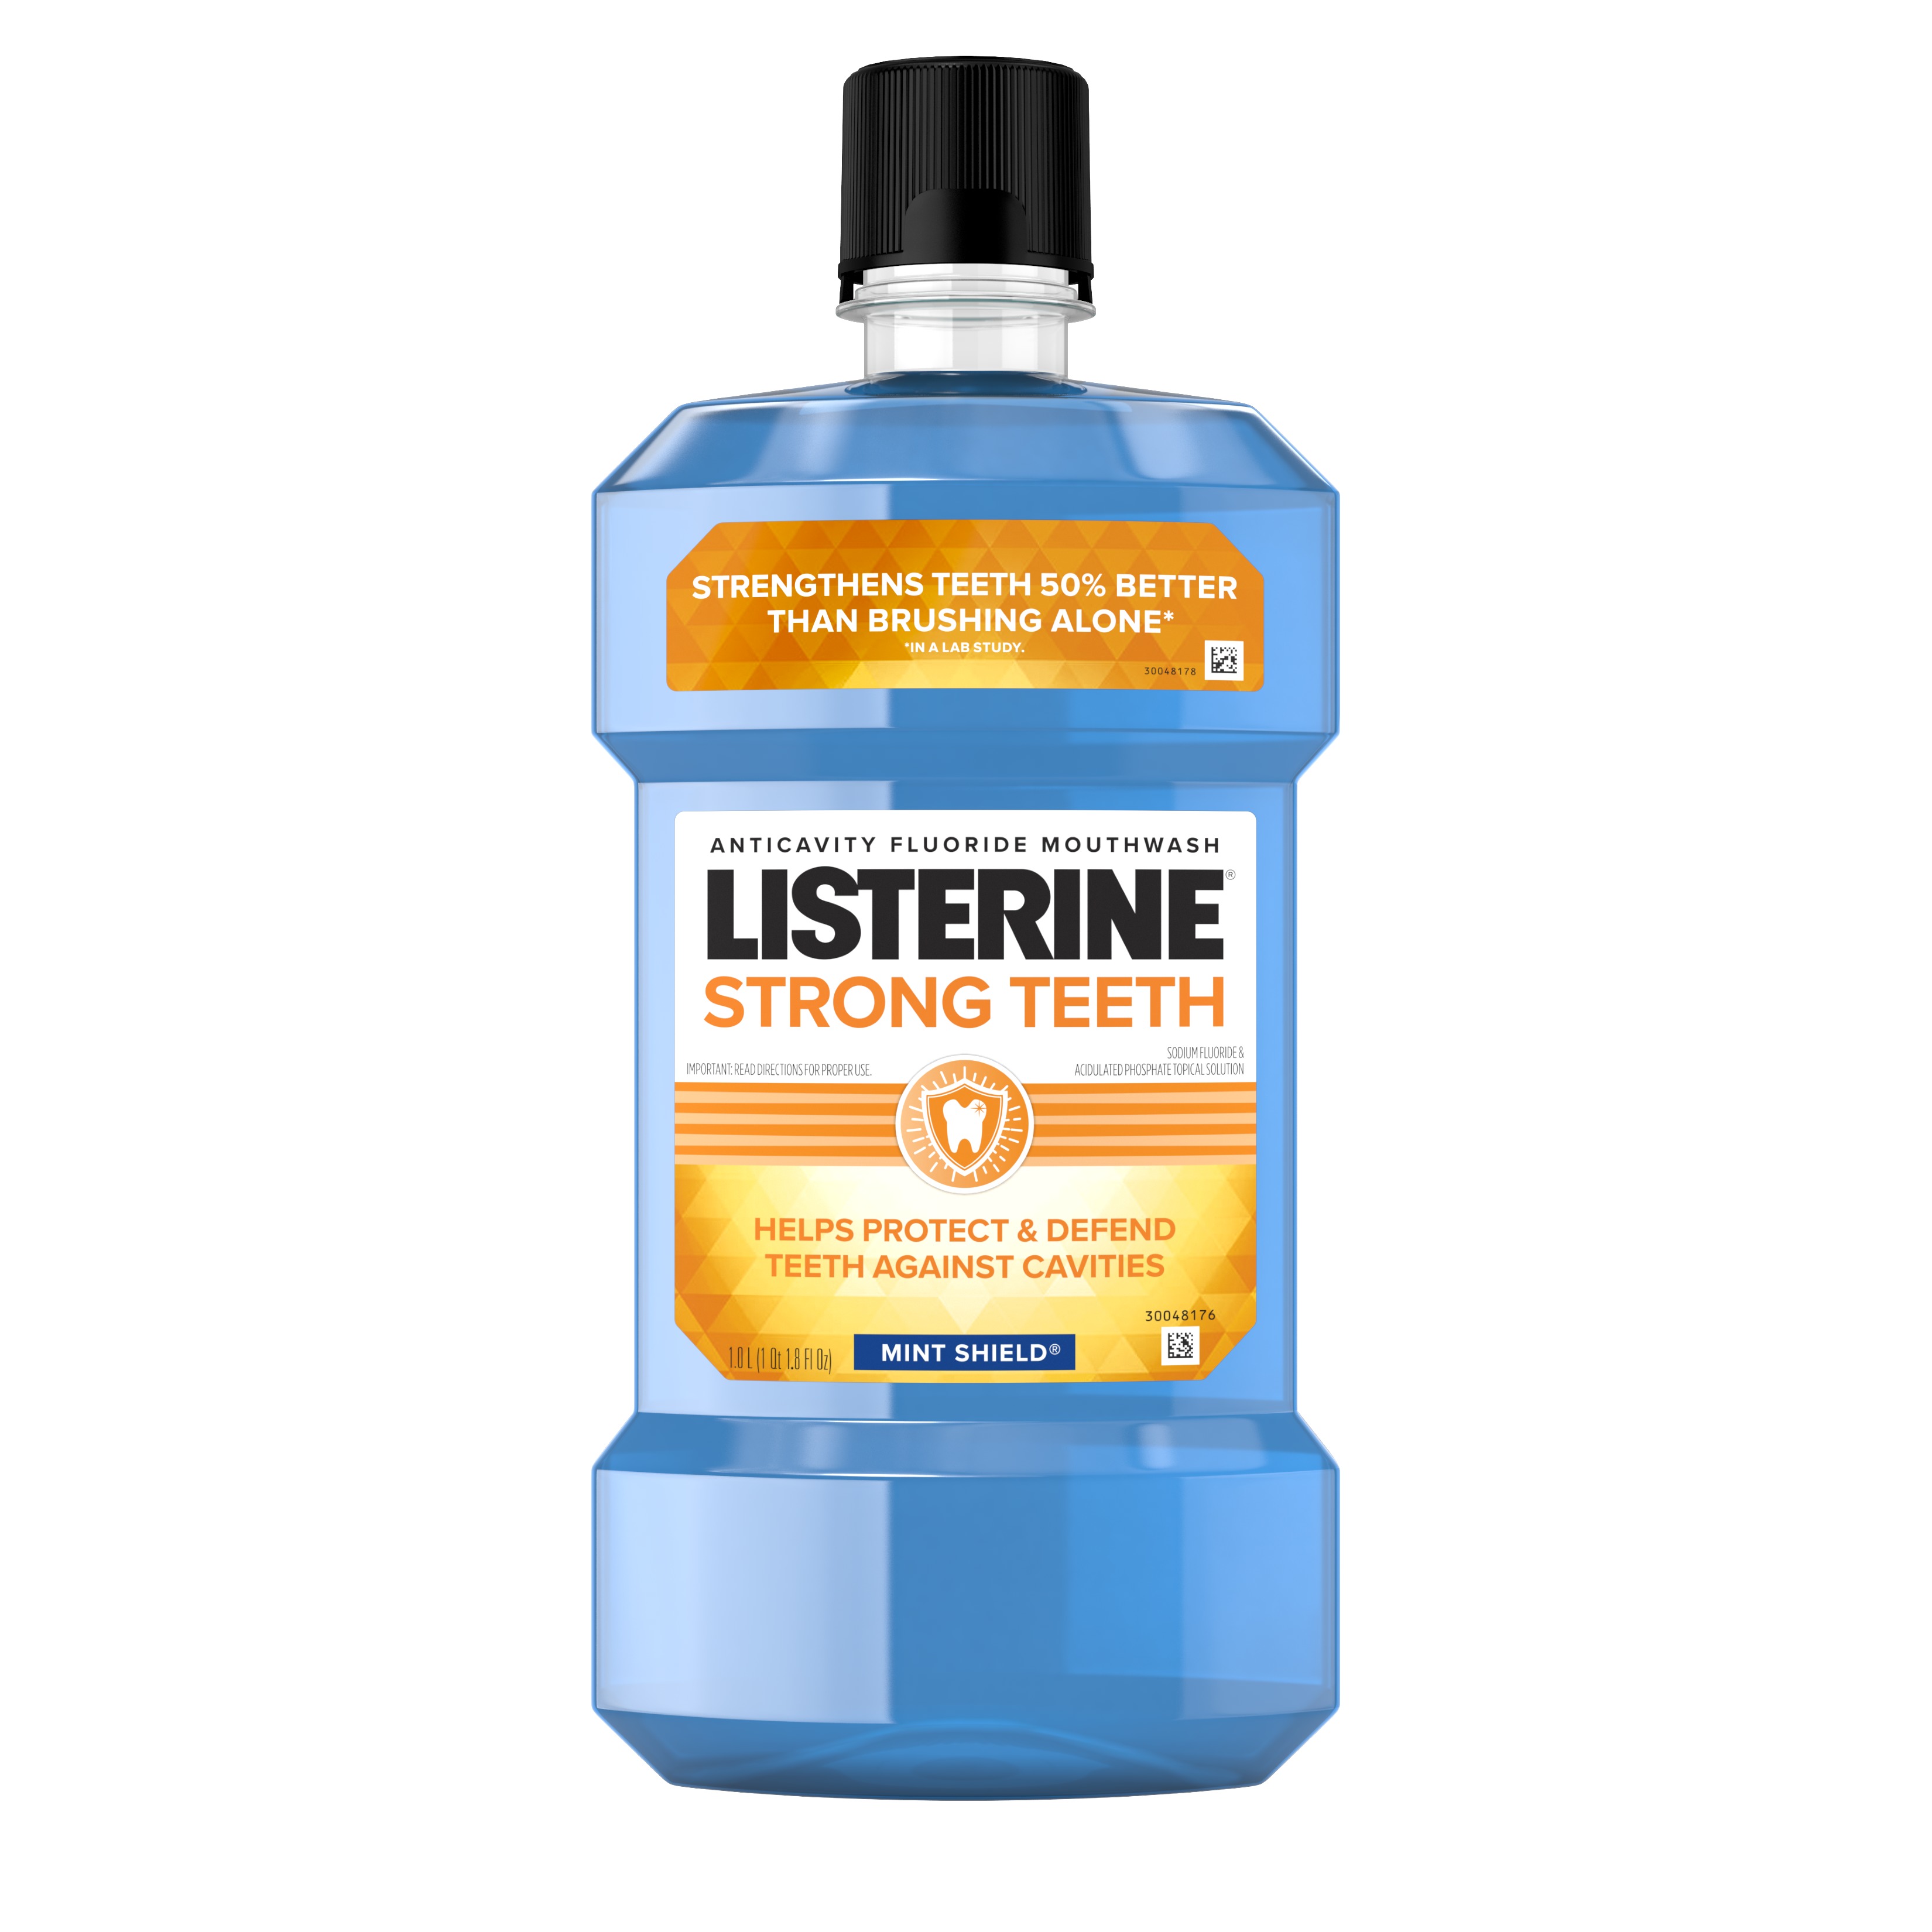 LISTERINE® STRONG TEETH Anticavity Fluoride Mouthwash MINT SHIELD